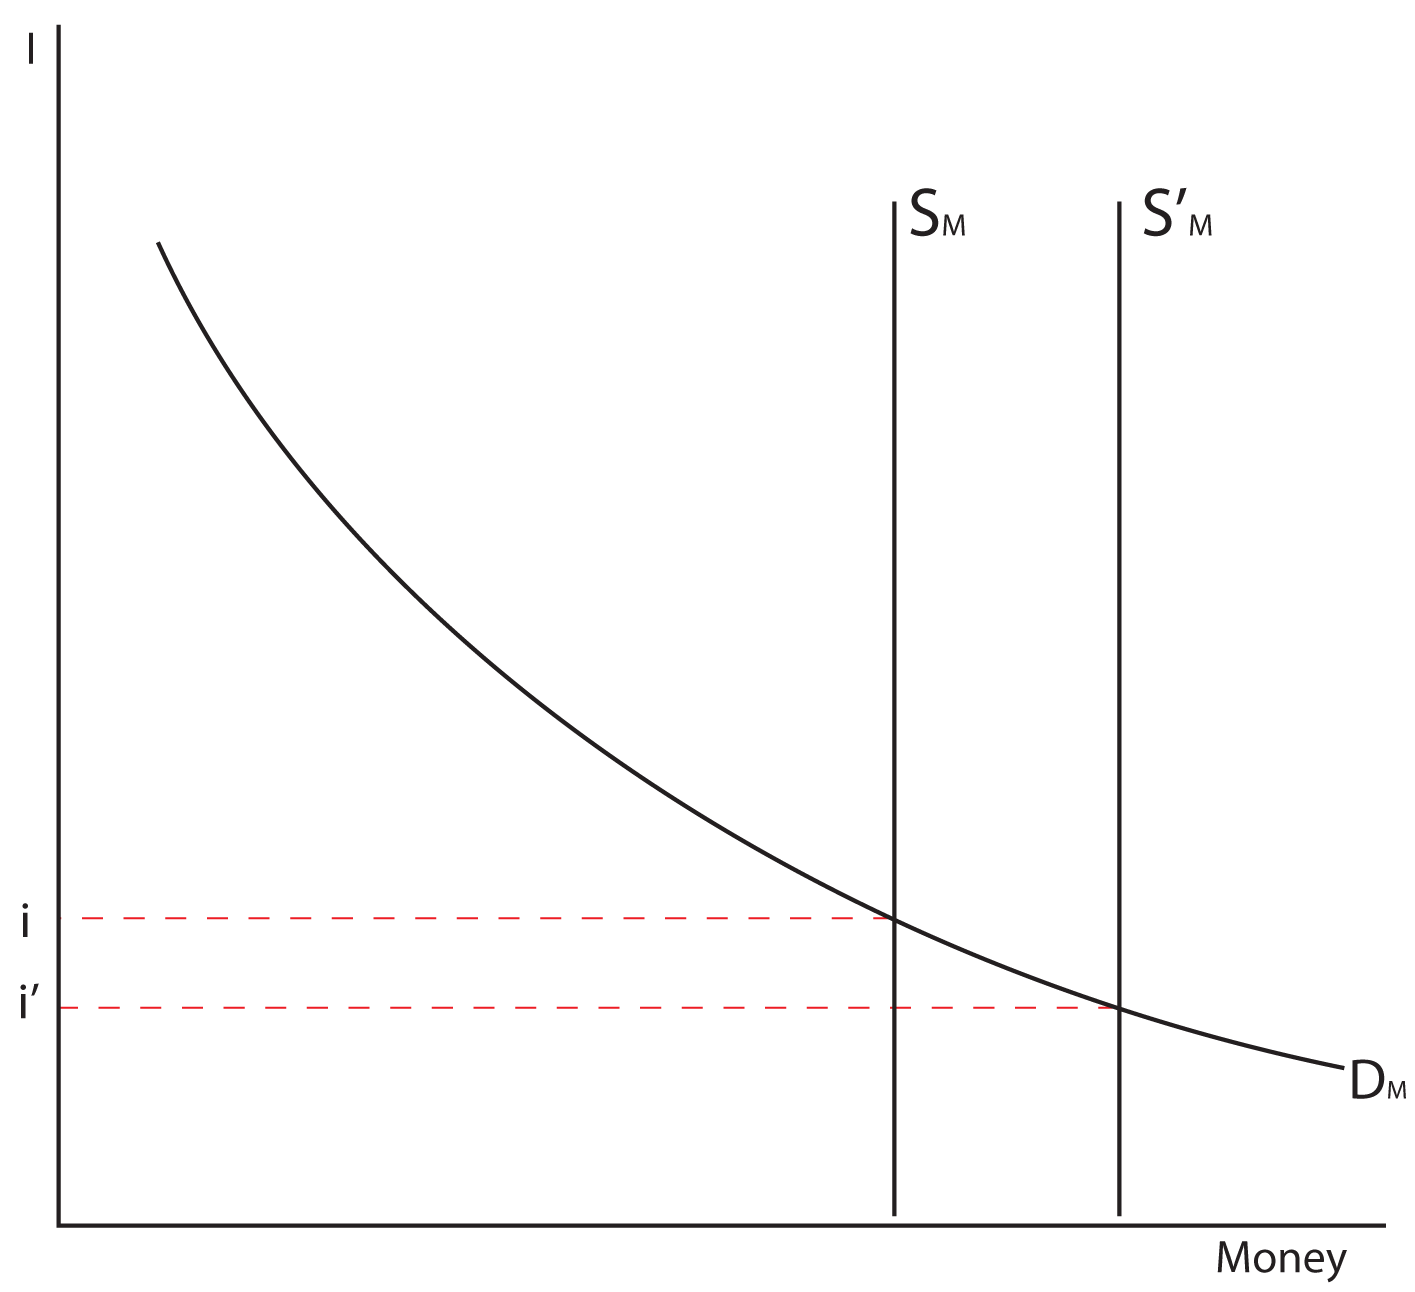 10.04
This graph shows money on the X axis and I on the Y axis.  A vertical line labeled S M (meaning Supply of Money) sits in the middle of the graph.  A curved line labeled D M (meaning Demand for Money) slopes downward from the Y axis and is concave away from the origin.  A second vertical line labeled S Prime M sits to the right of S M.  
The point at which S M intersects D M is connected by a horizontal red dotted line to the Y axis.  The point where the dotted line meets the Y axis is labeled I 0.  
The point at which S M Prime intersects D M is connected by a horizontal red dotted line to the Y axis.  The point where the dotted line meets the Y axis is labeled I Prime.  